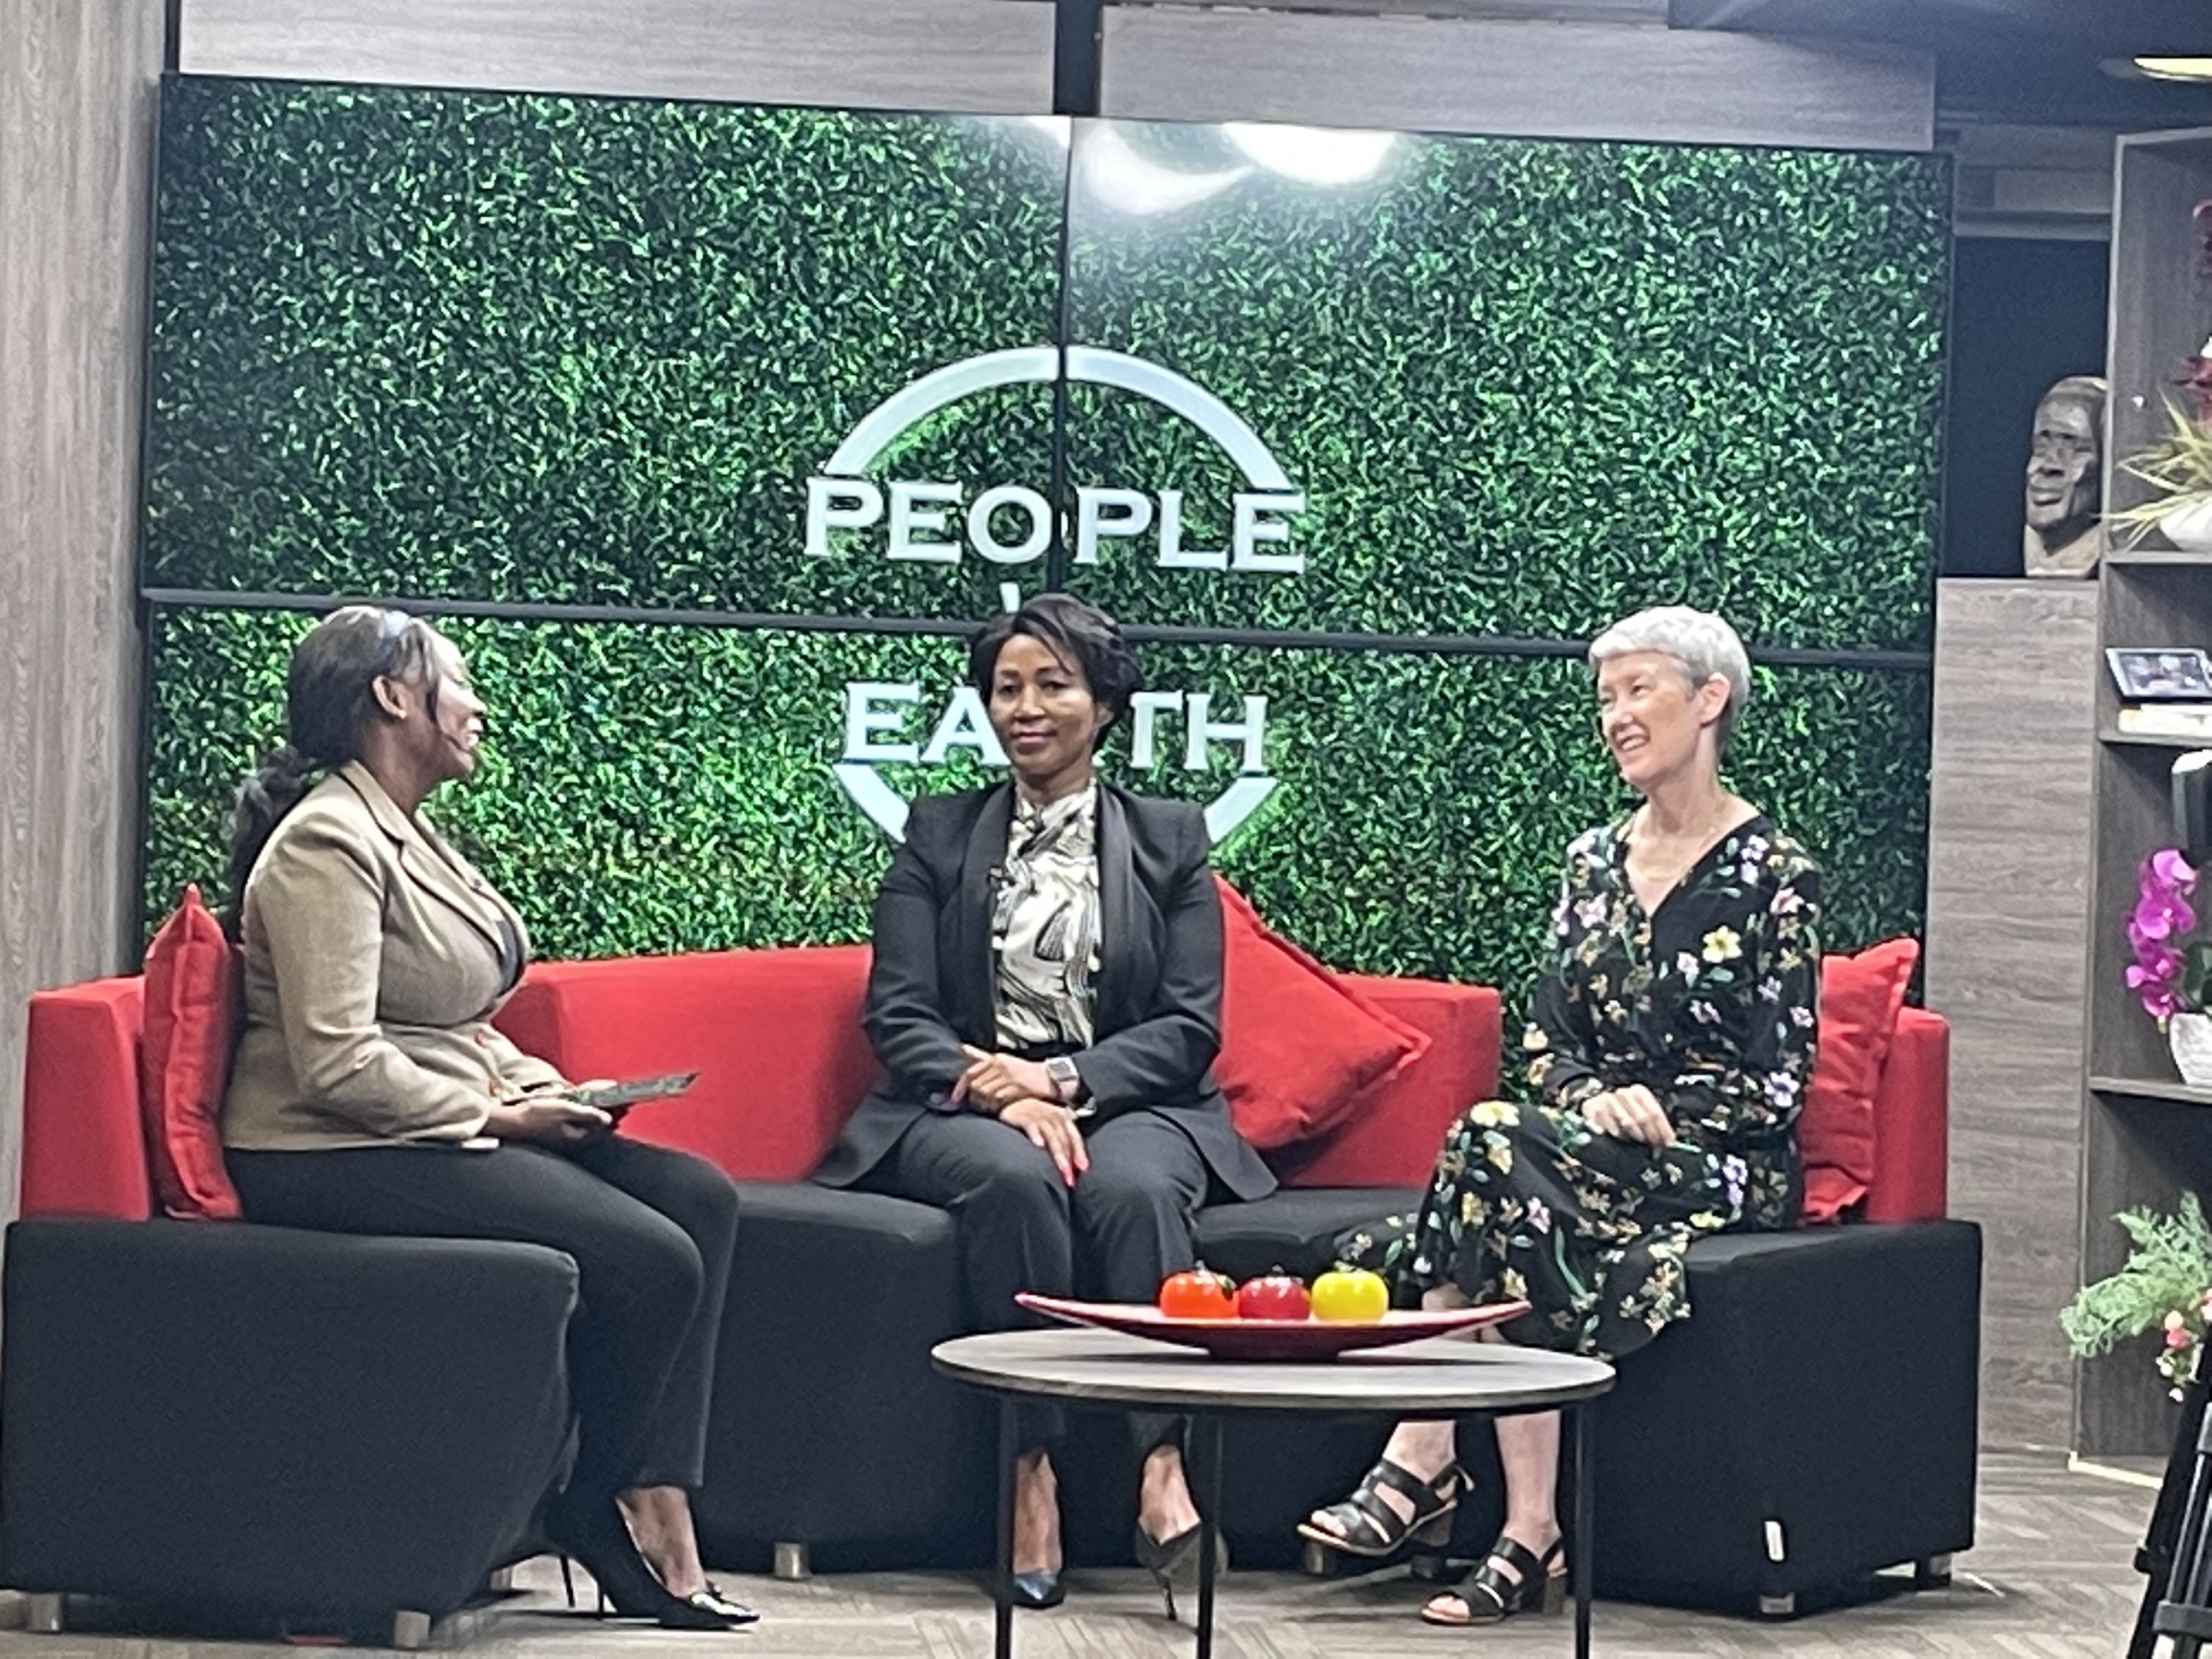 H.E. Brontë Moules and Dr Xaba guests on @3KtvZim #PeoplenEarth show